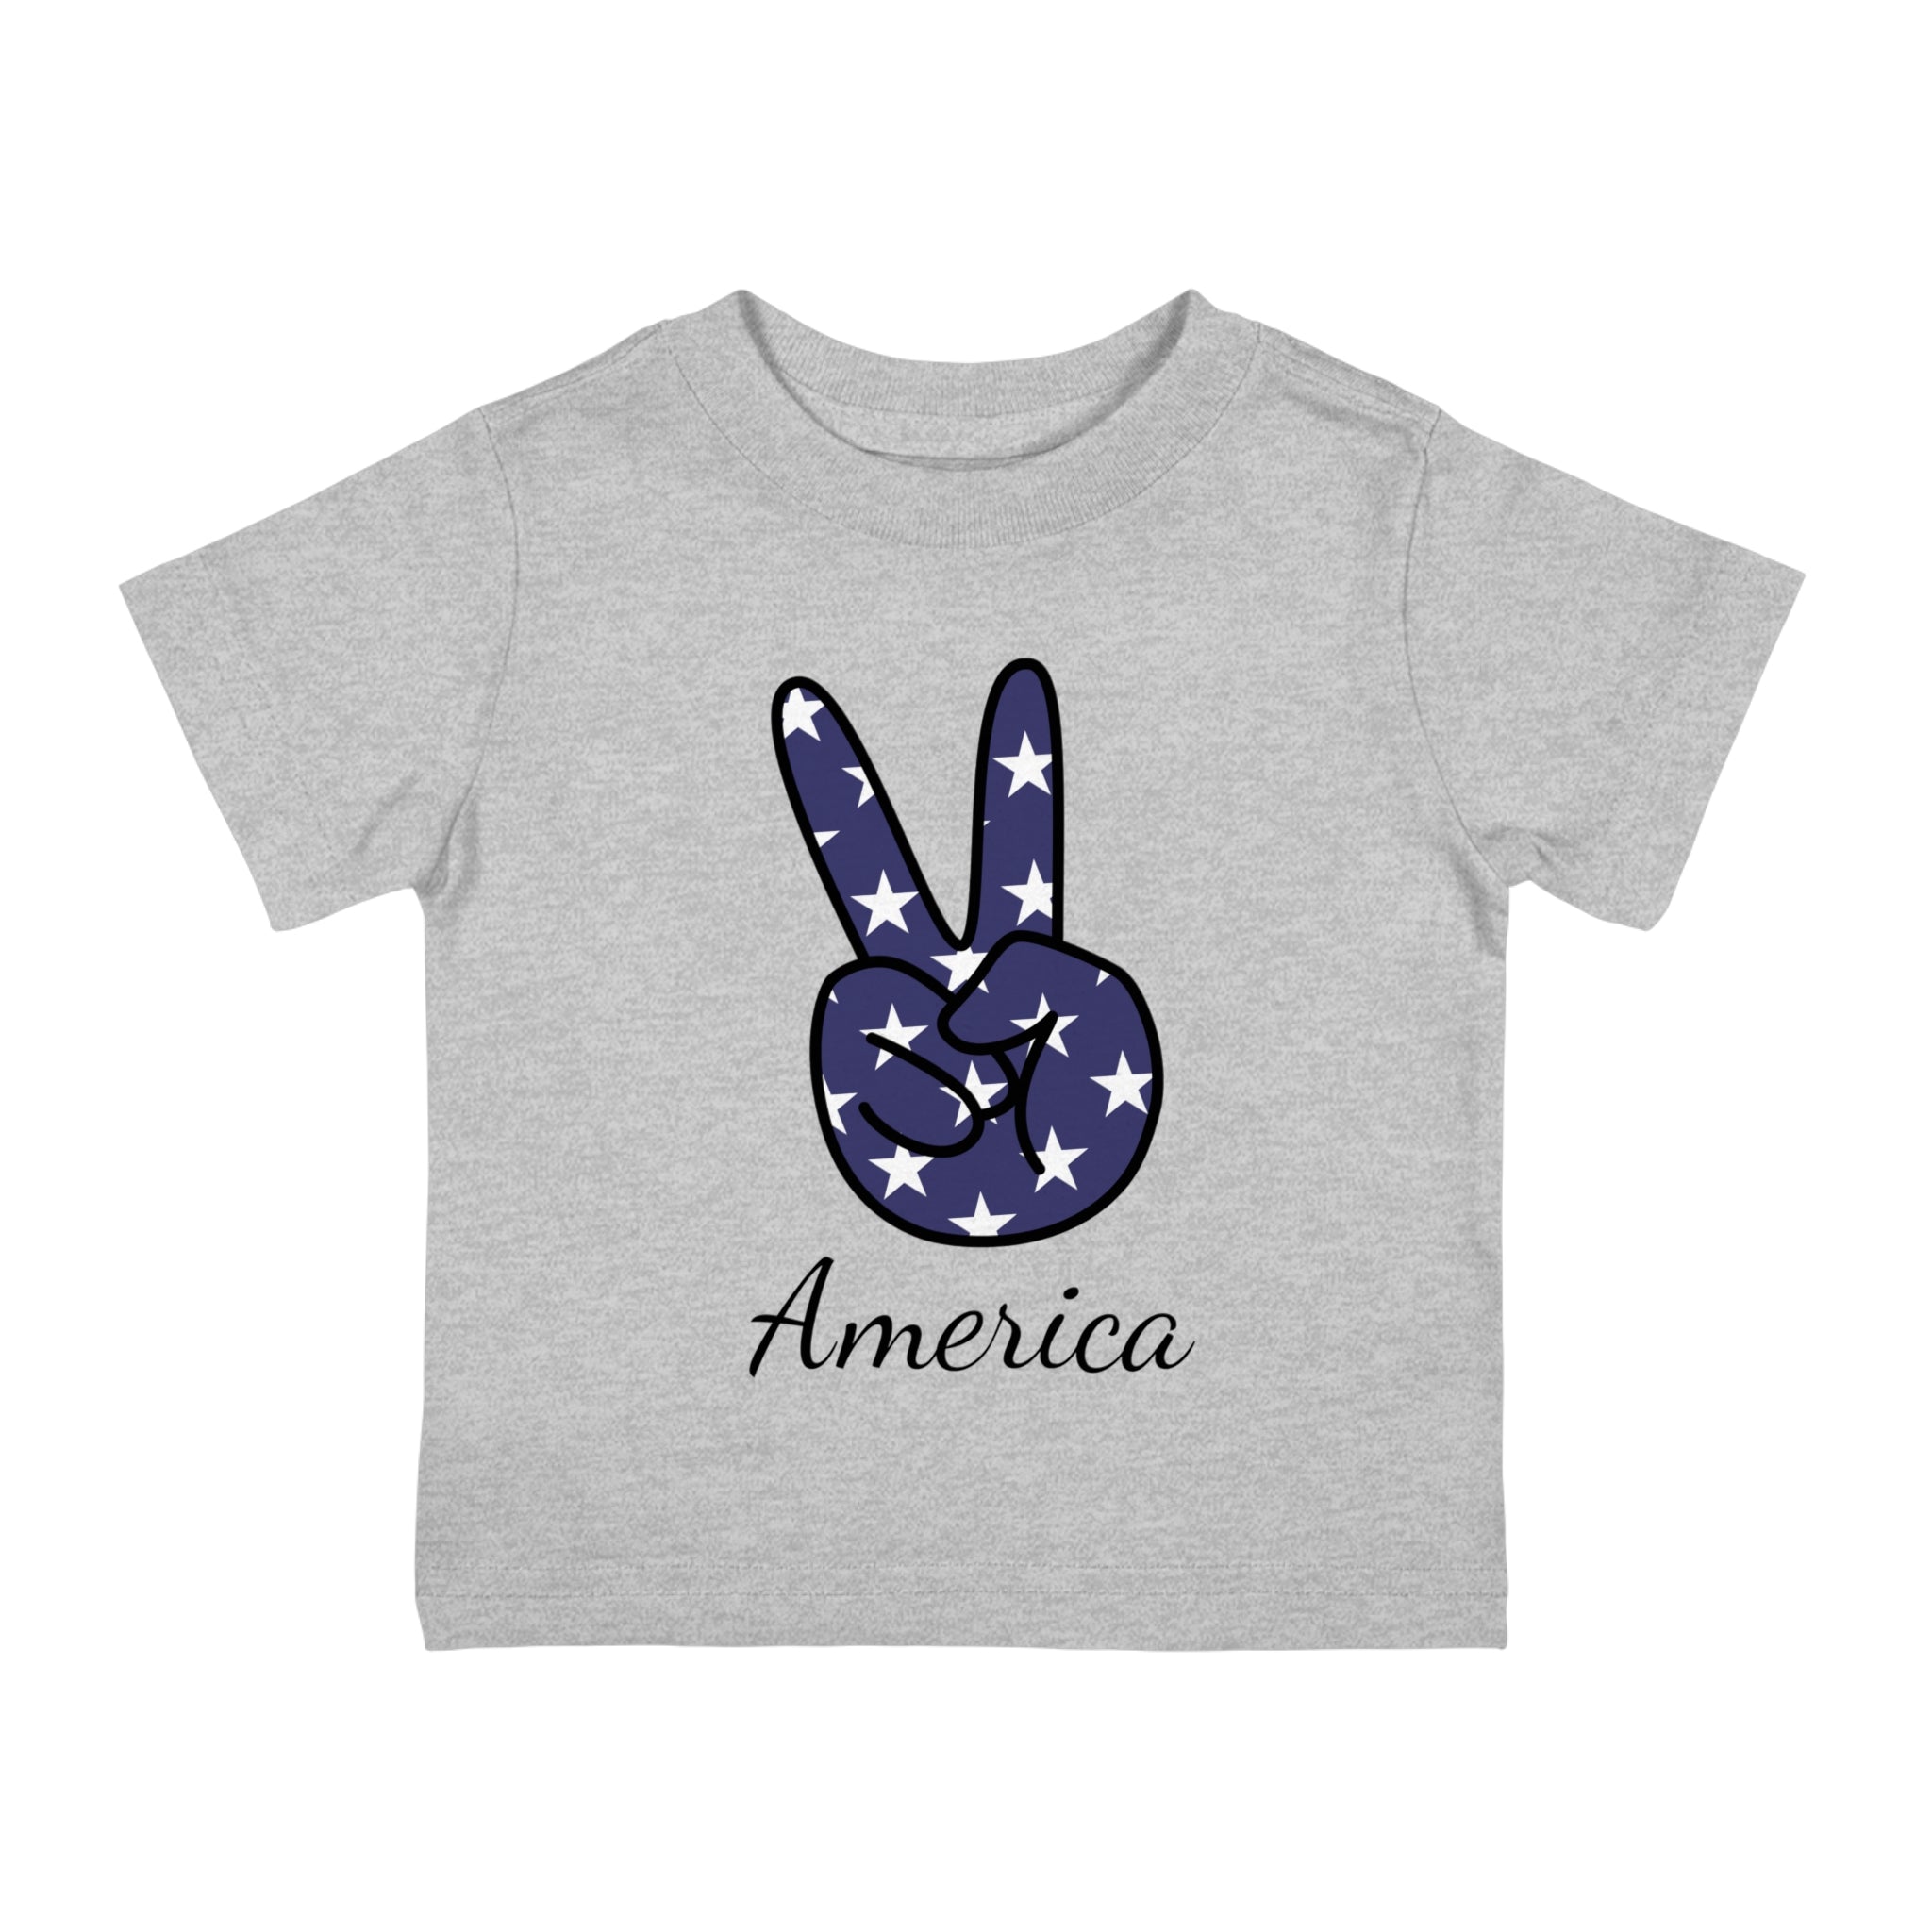 America Piece Sign Design Infant Shirt, Baby Tee, Infant Tee